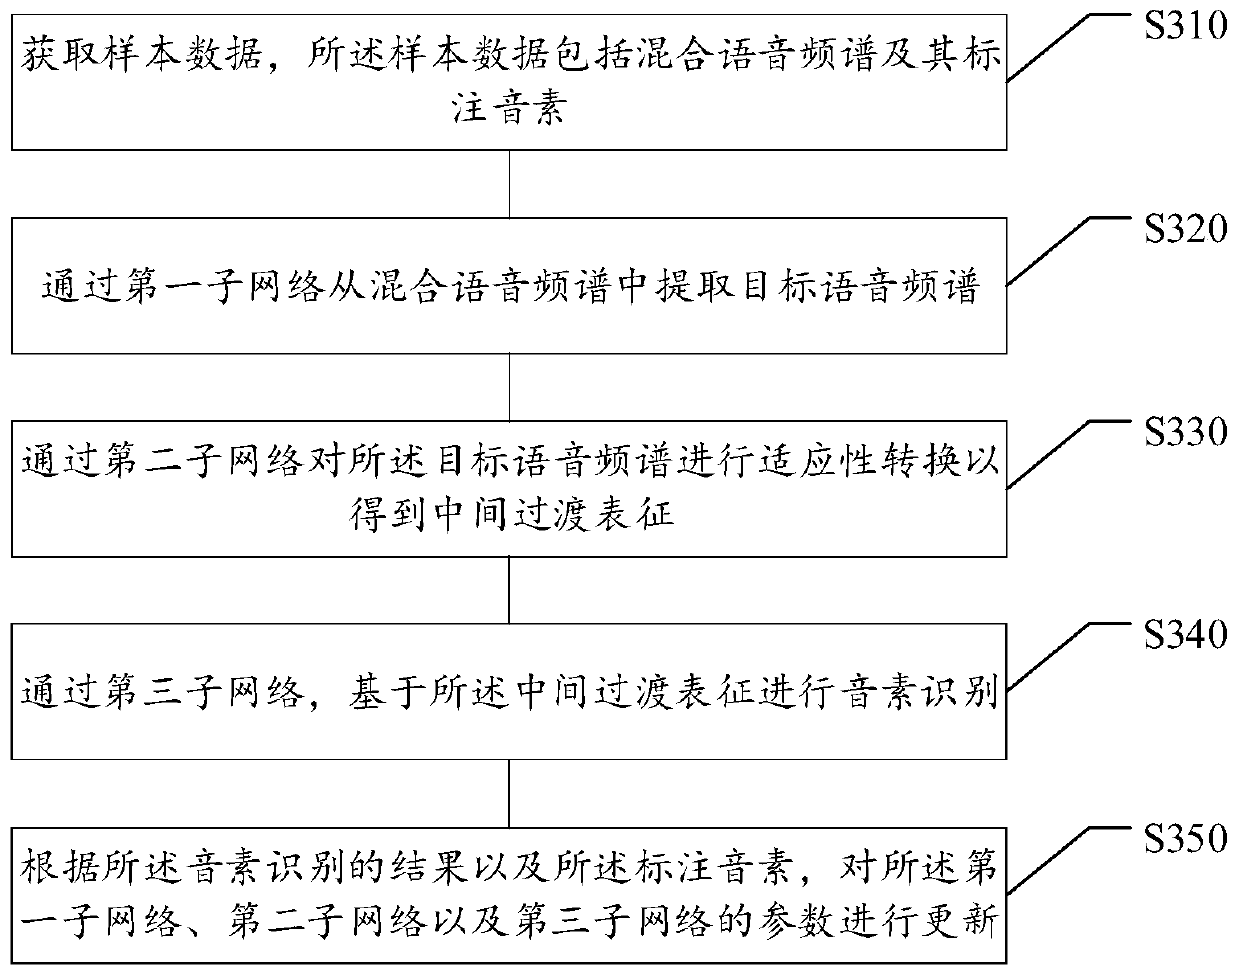 Voice recognizing method and device, as well as neural network training method and device